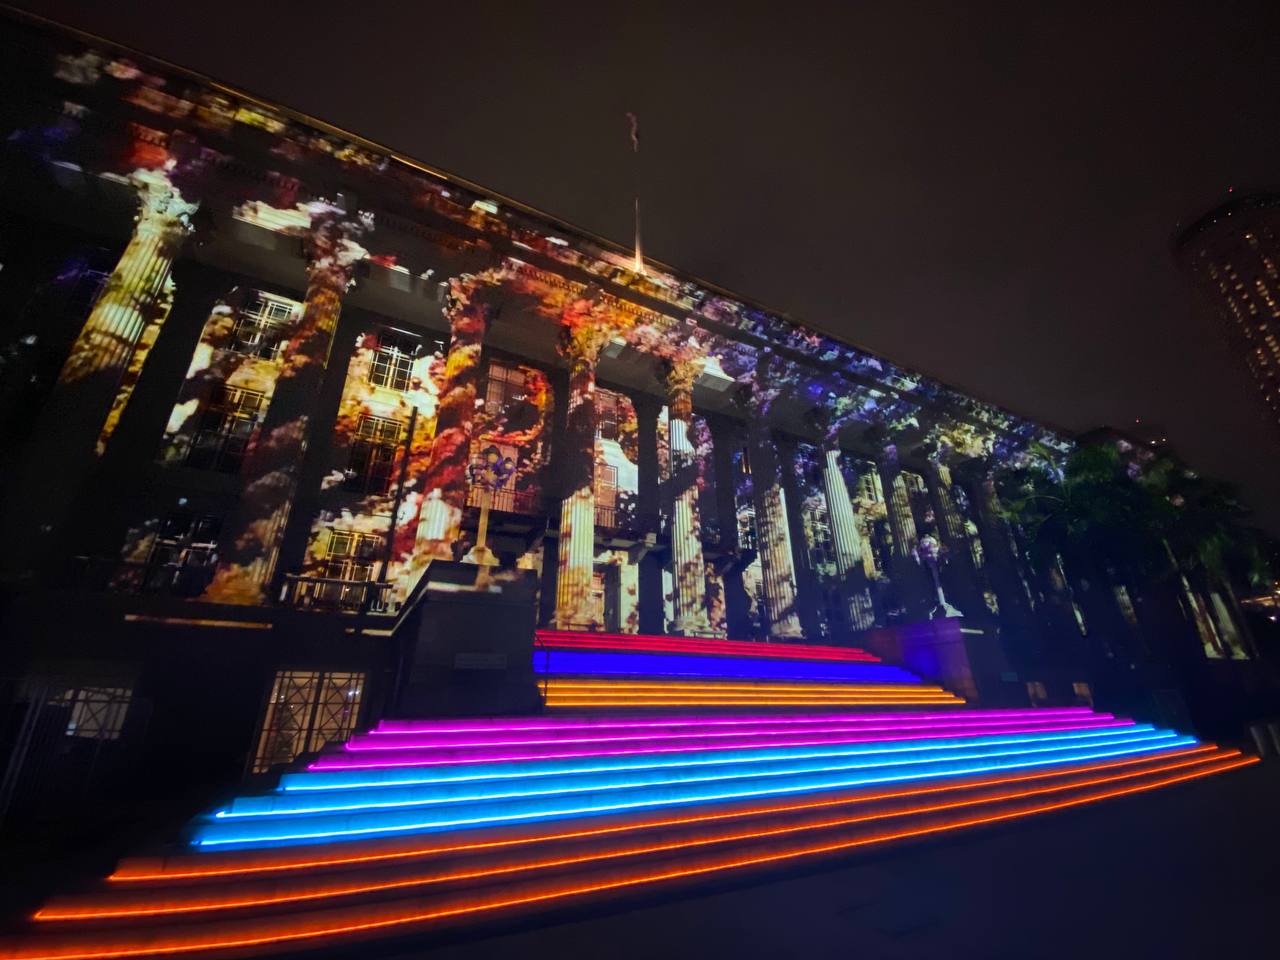 Light to Night Festival with larger-than-life art installations in S ...